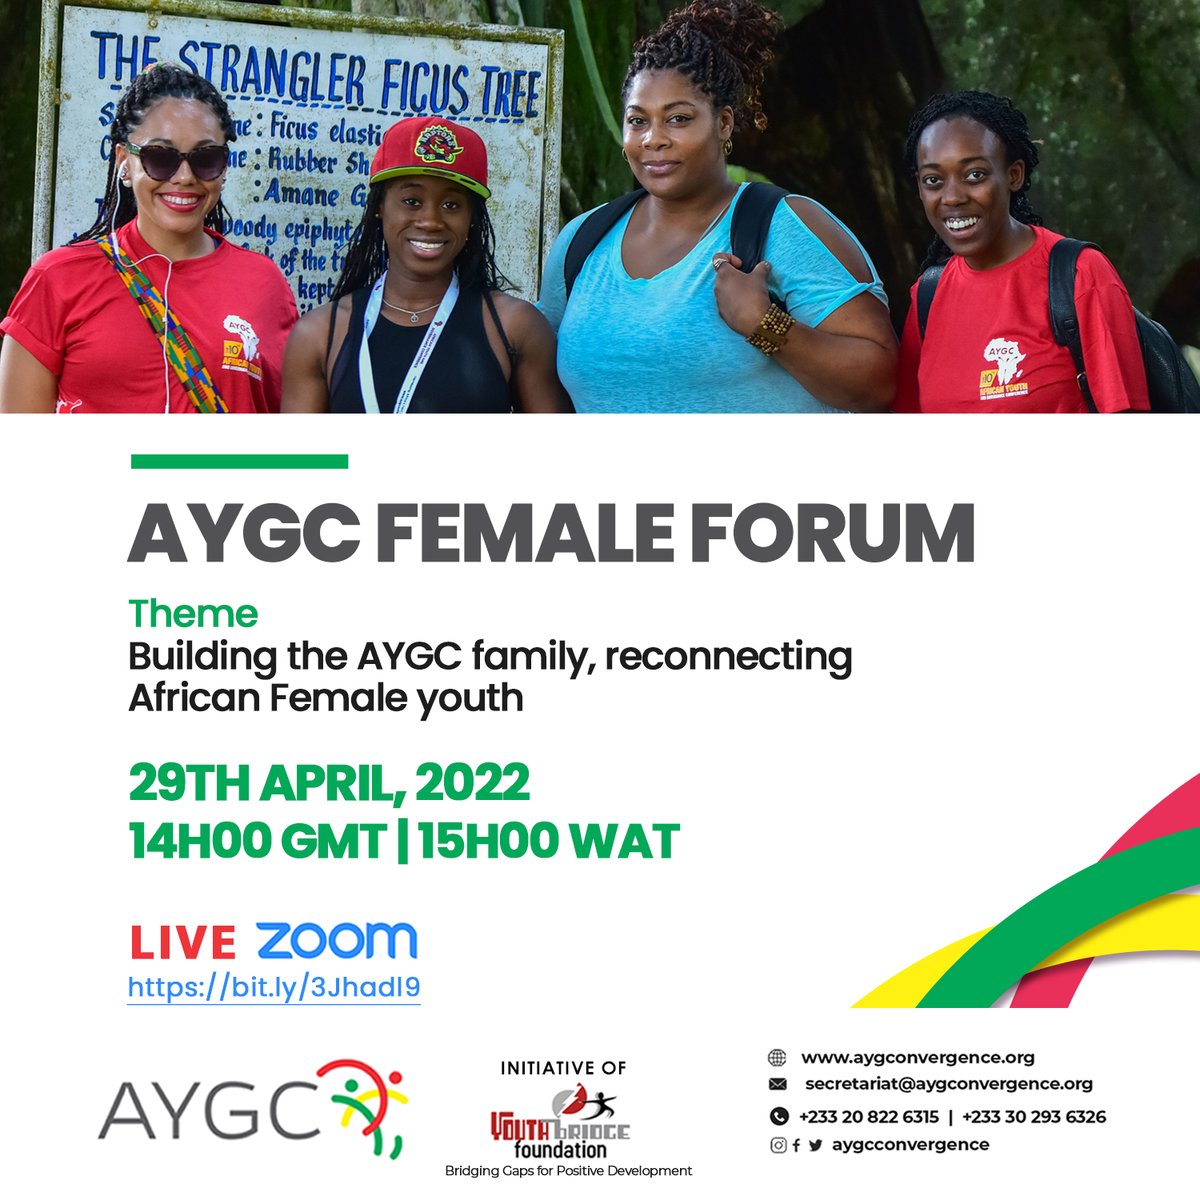 #AYGC alumni invites young African women to the AYGC female forum on Friday, 29th #April 2022. Be part of young African women reconnecting African #youth #BeyondBorders. Don't miss this! #YouthMatter #AYGC2022 #AfricanWomenLead